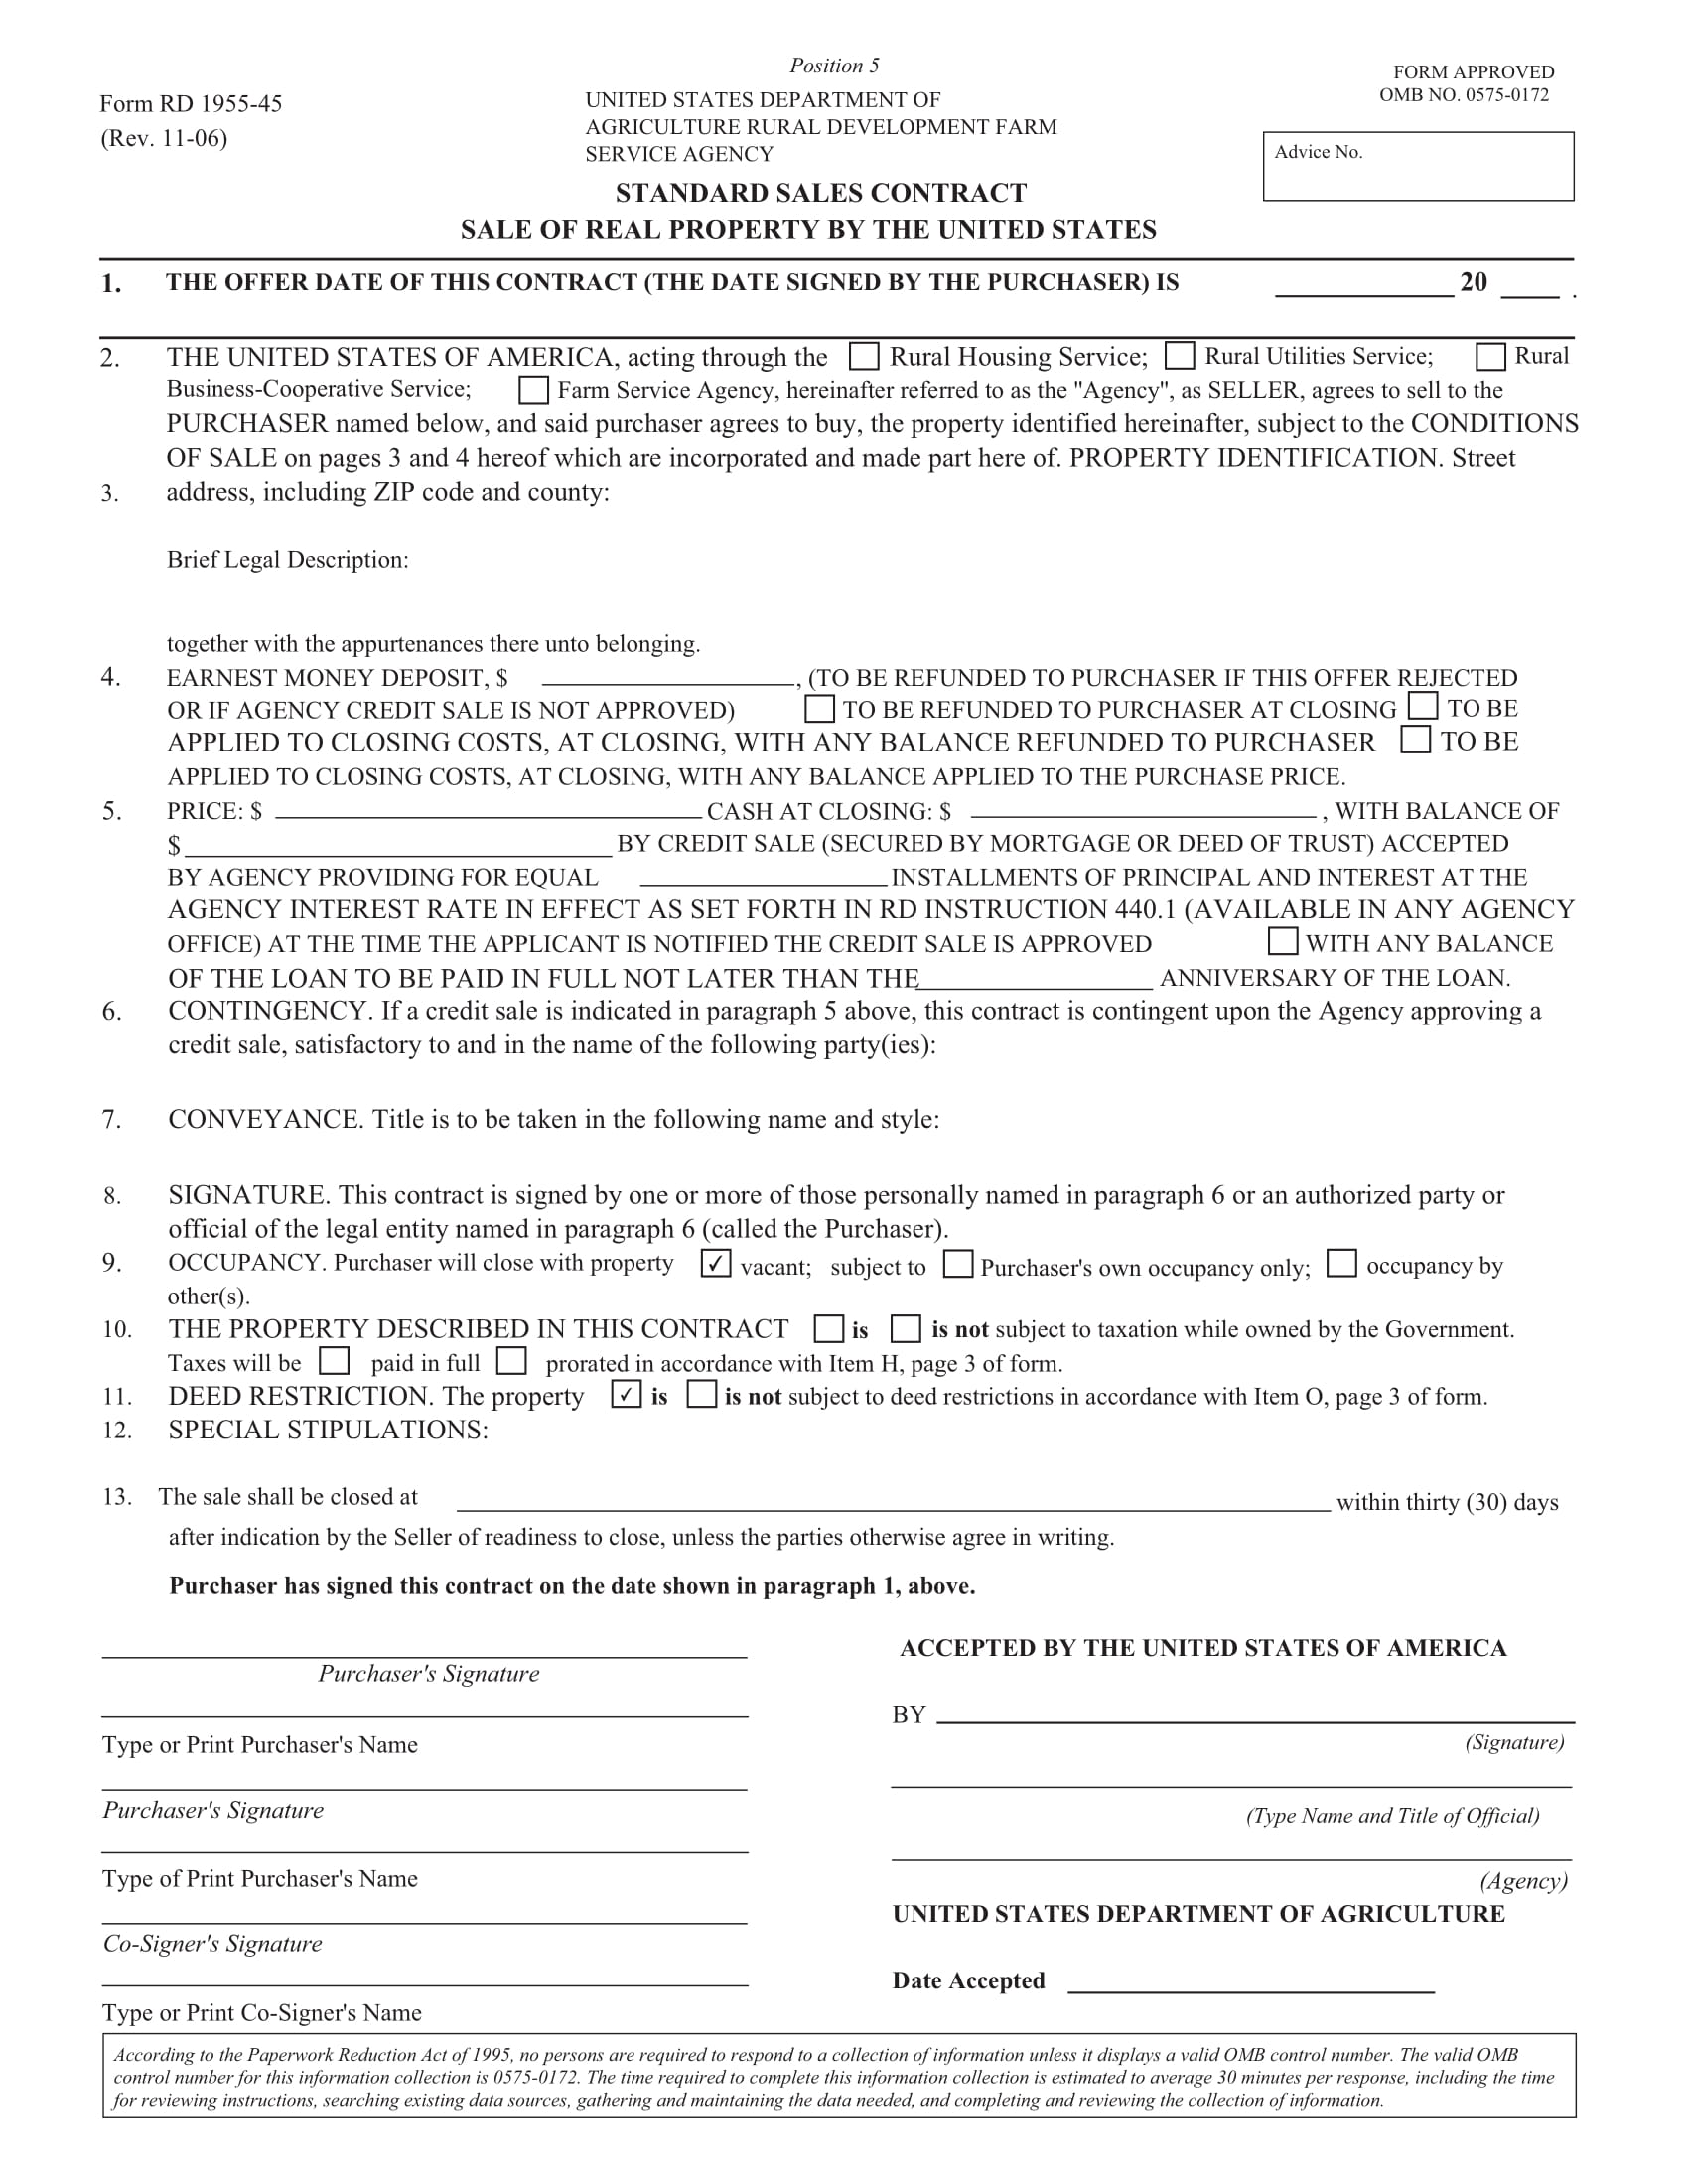 standard home real property sales contract form 1